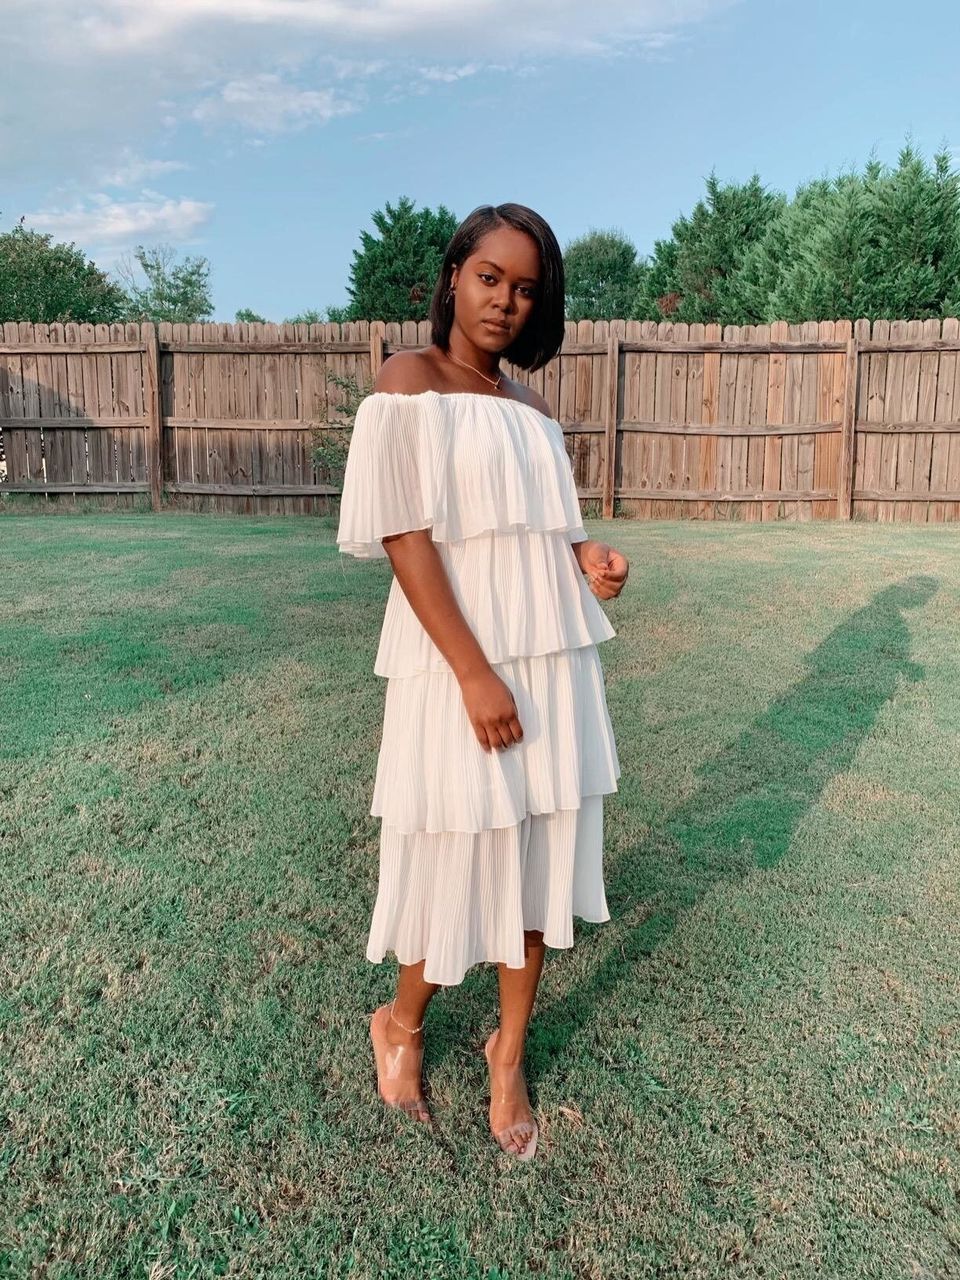 A chiffon off-the-shoulder party dress